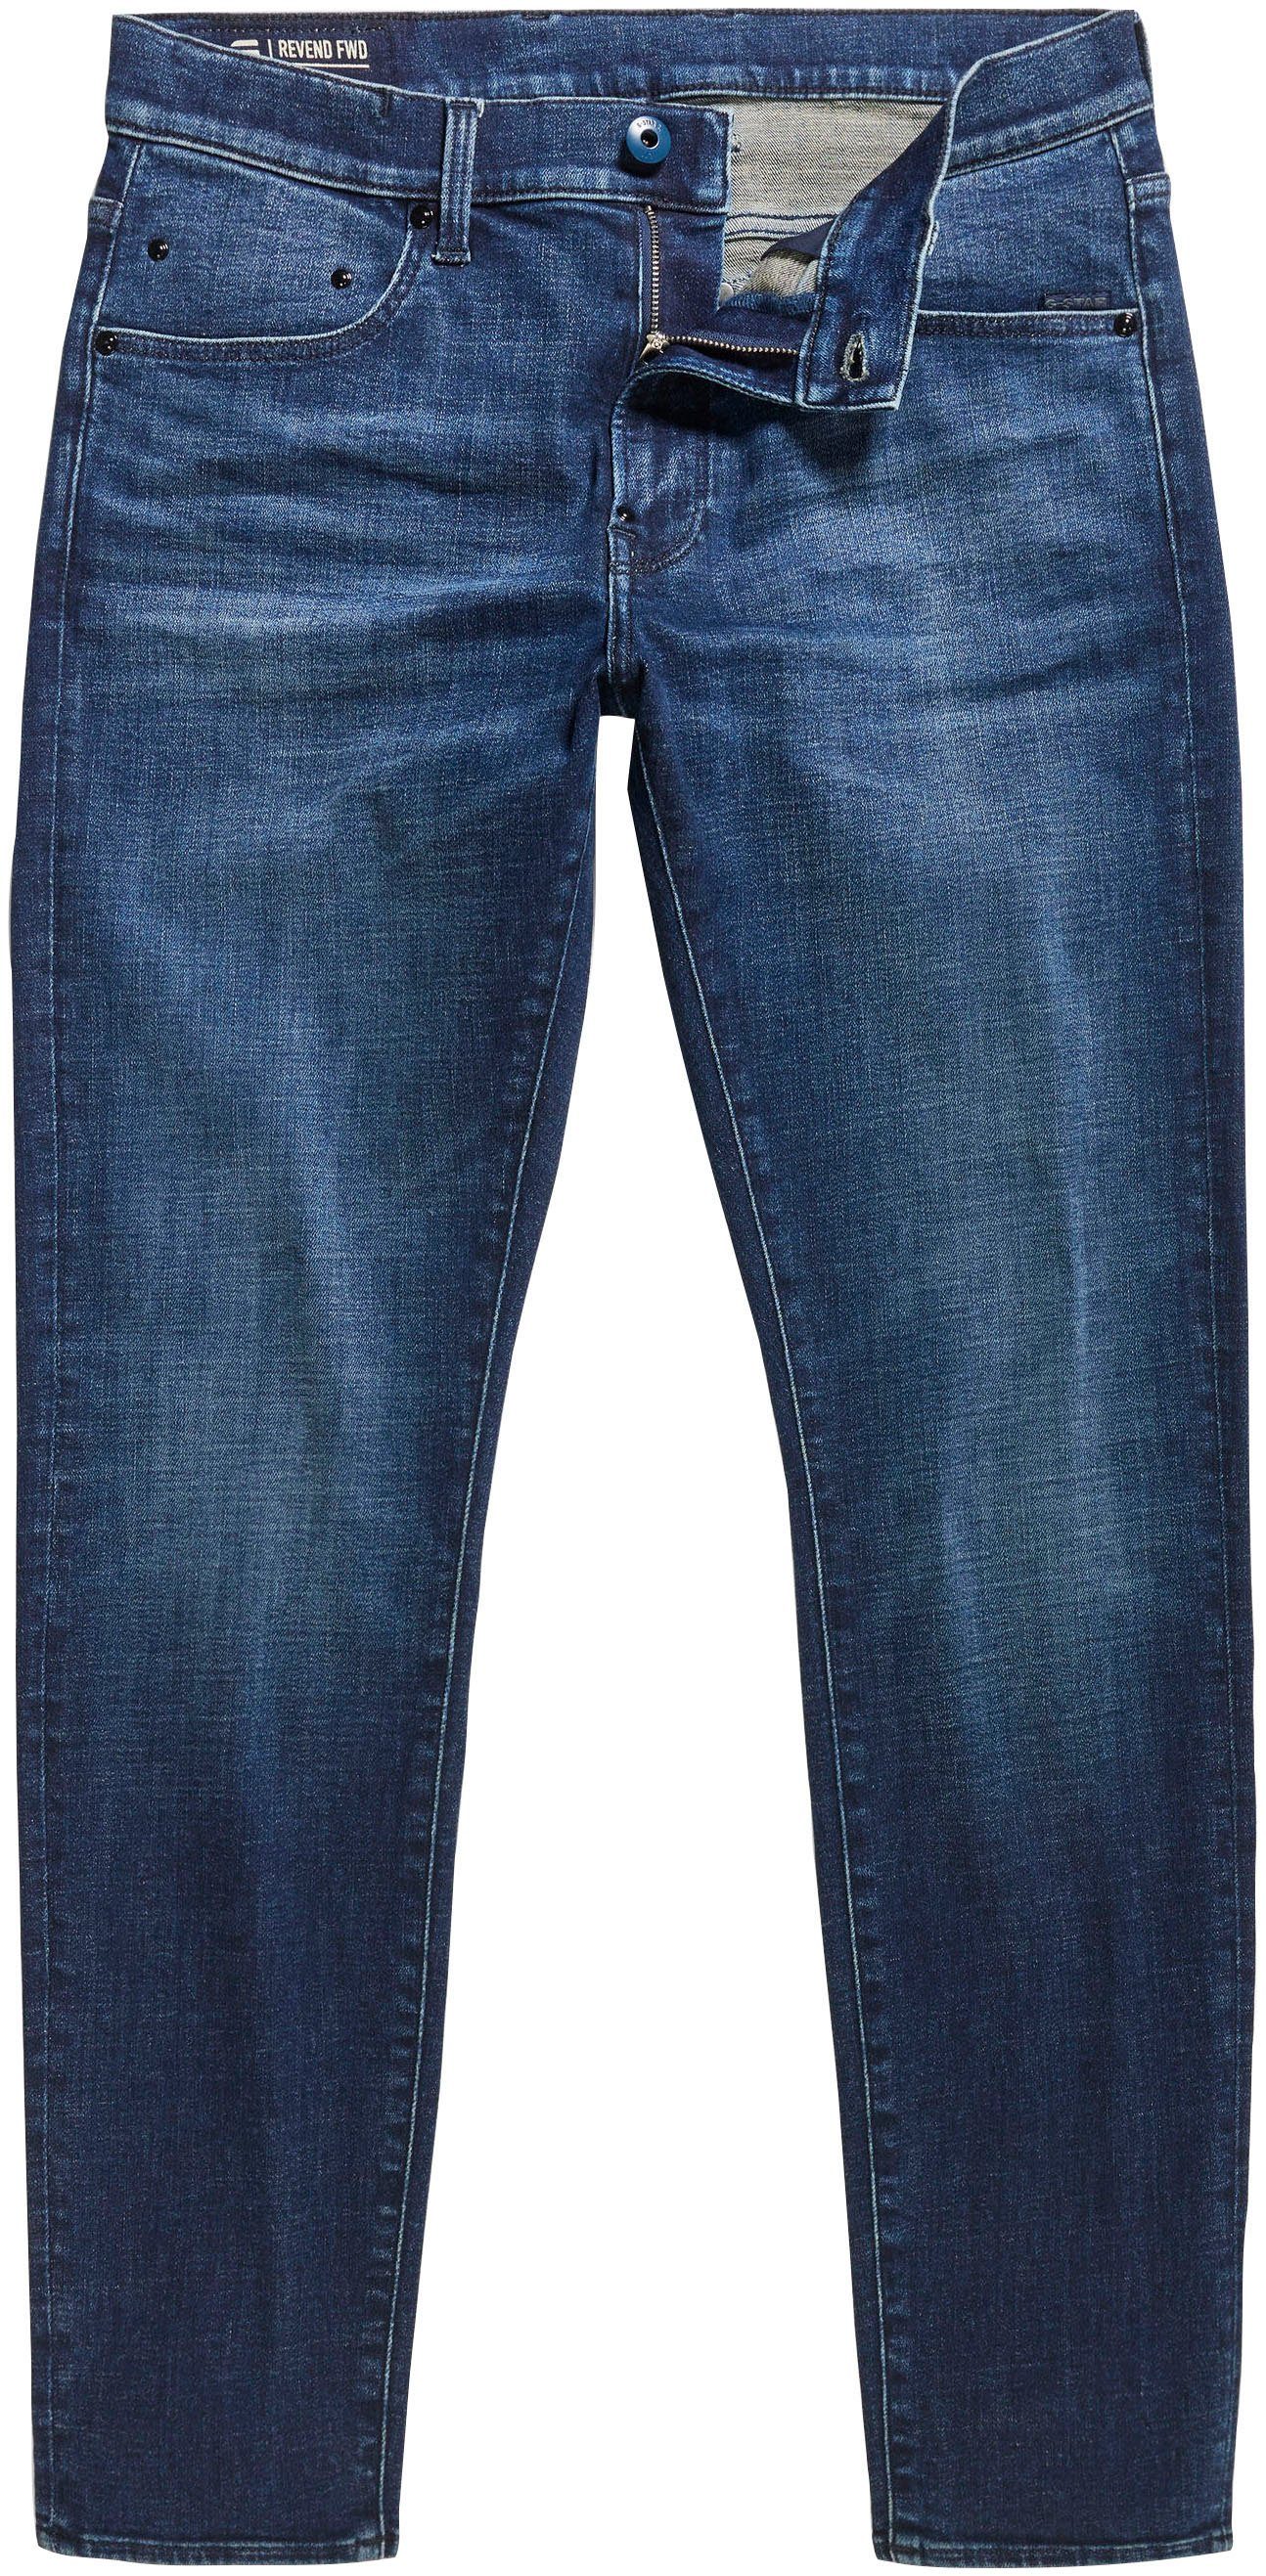 Skinny-fit-Jeans G-Star in worn blue himalayan RAW